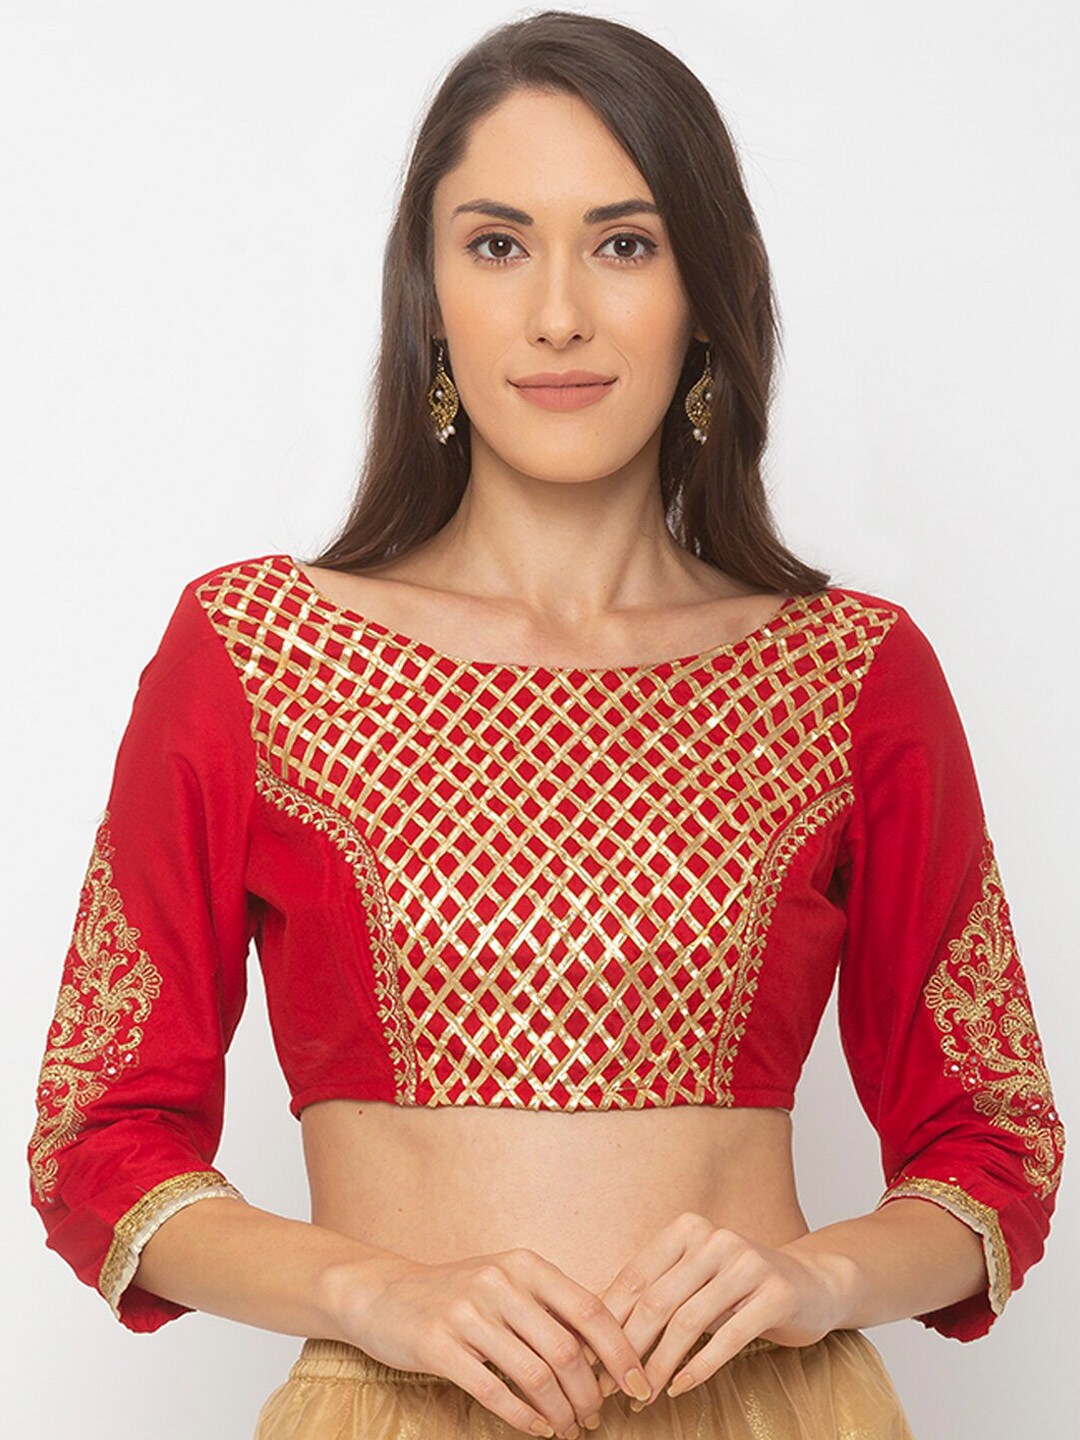 Globus Women Red & Gold-Coloured Embellished Saree Blouse Price in India